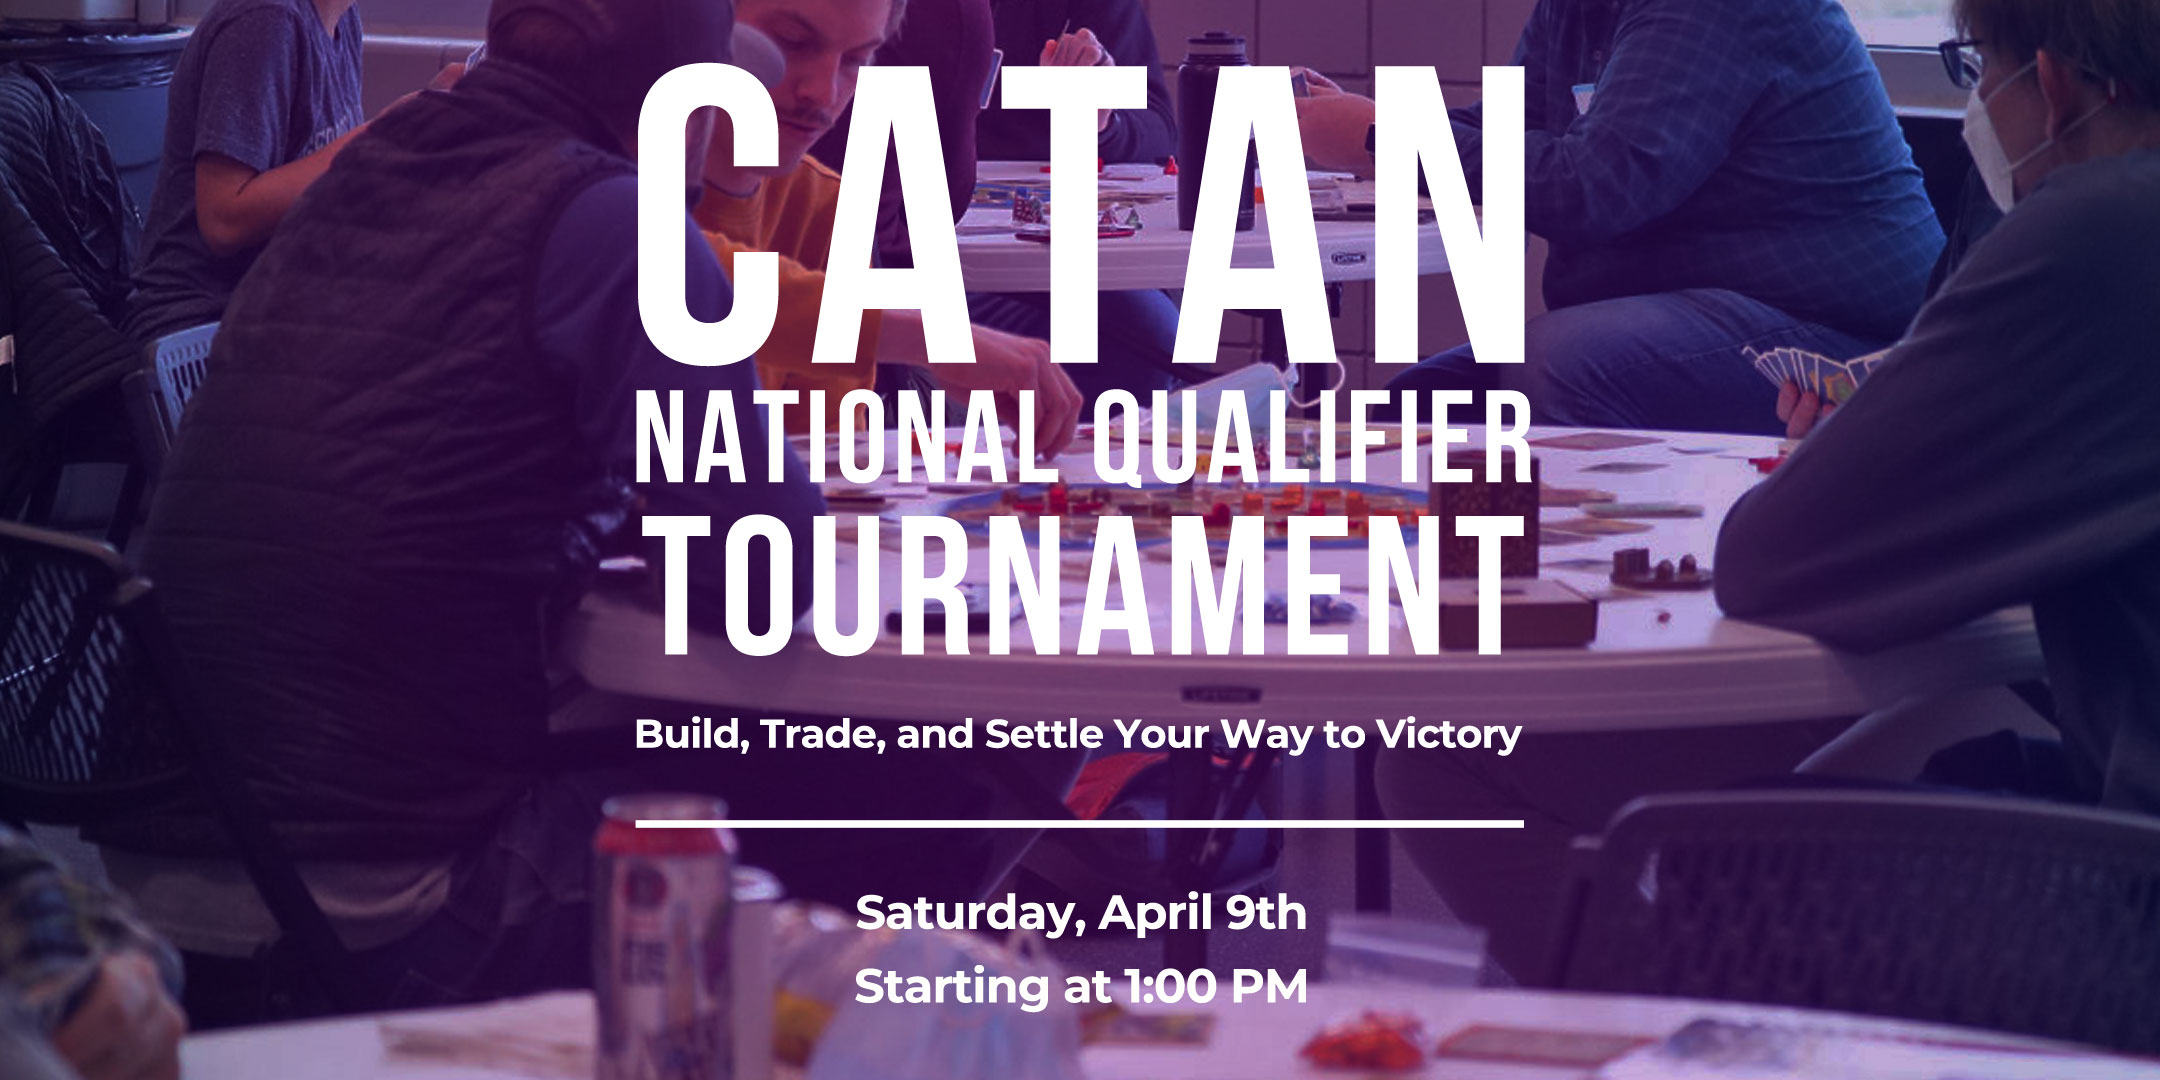 Iowa Catan National Qualifier Tournament 04-09-22 with The Rook Room